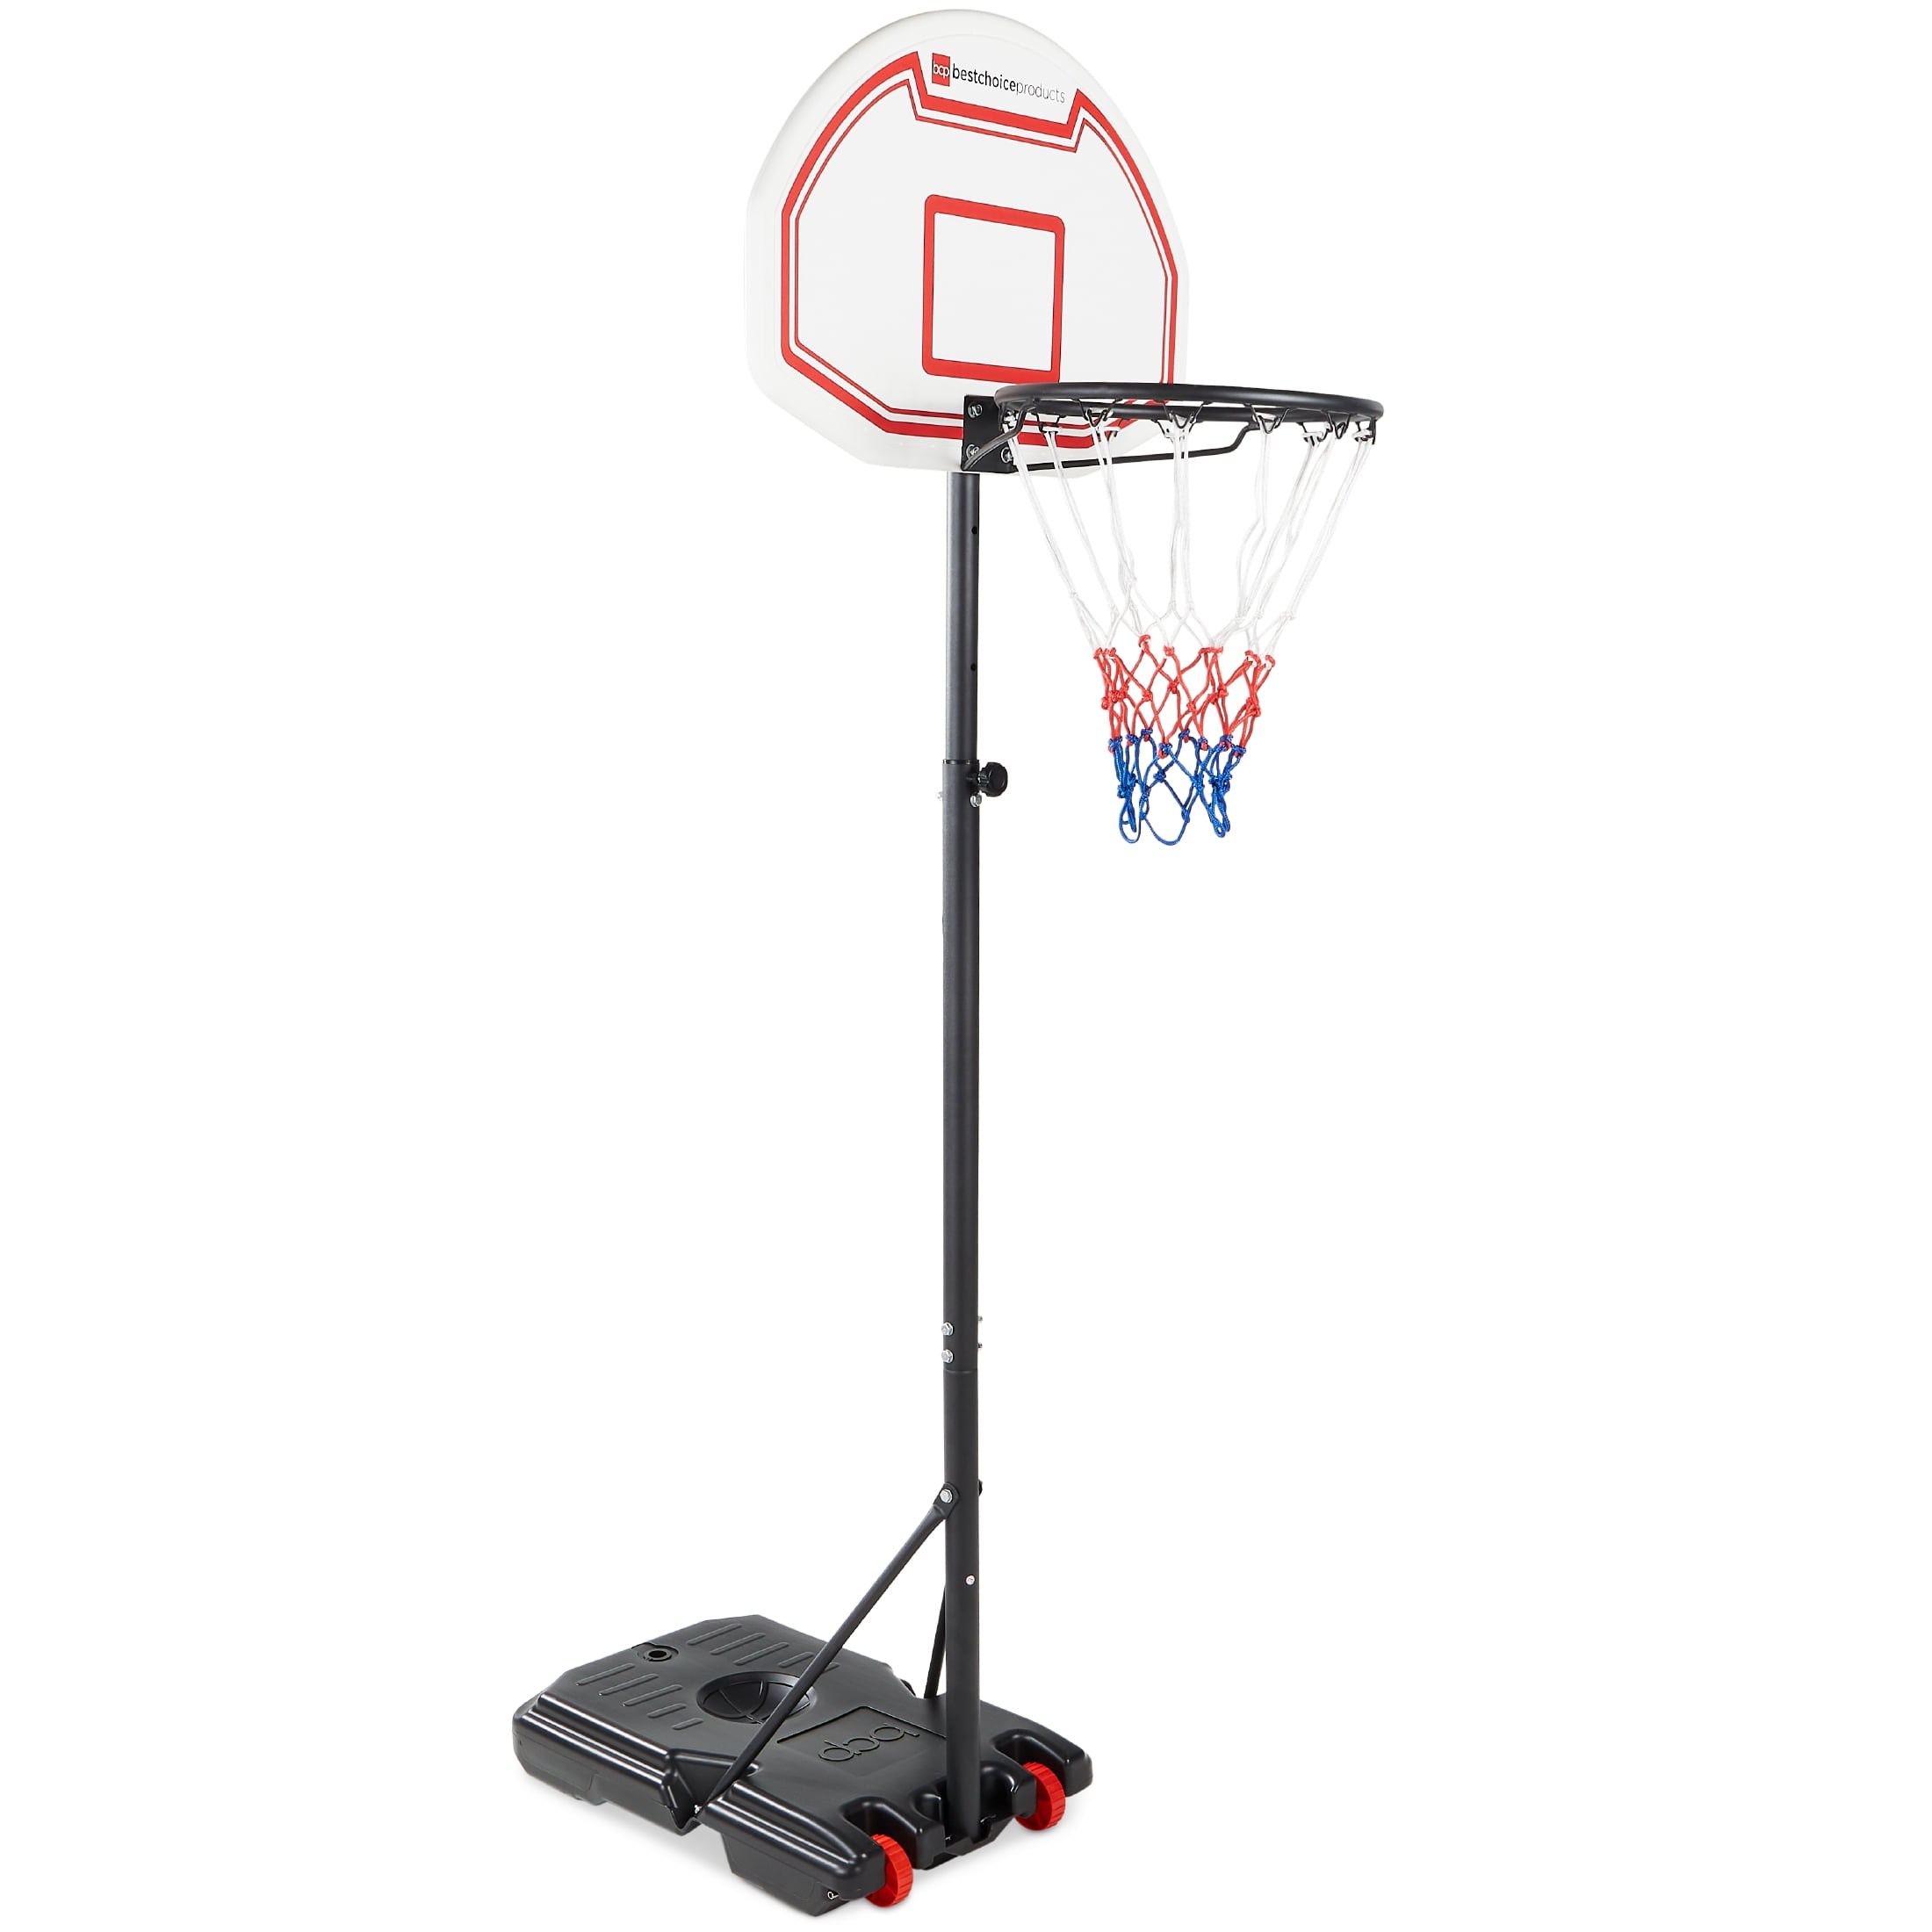 4-in-1 Kids Basketball Stand Hoop Set Sports Adjustable Play Game Gift Outdoor 